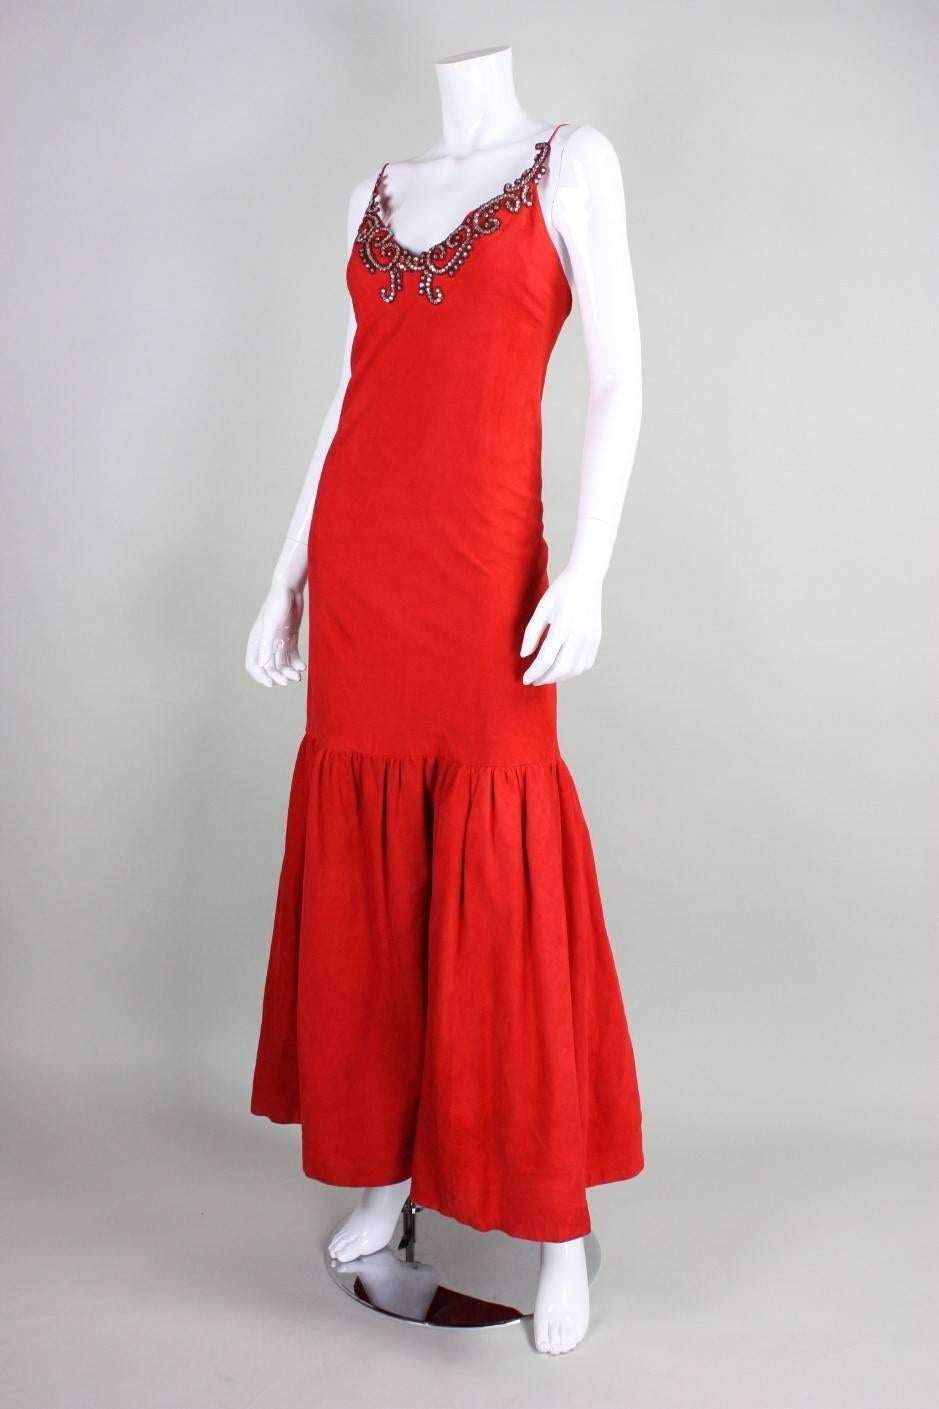 Stavropoulos gown dates to the 1980's and retailed at Martha's. It is made of cherry red suede and accented at the bodice with clear rhinestones and red beads. Center back zipper. Fully lined in a lightweight silk.

Measurements-
Bust: